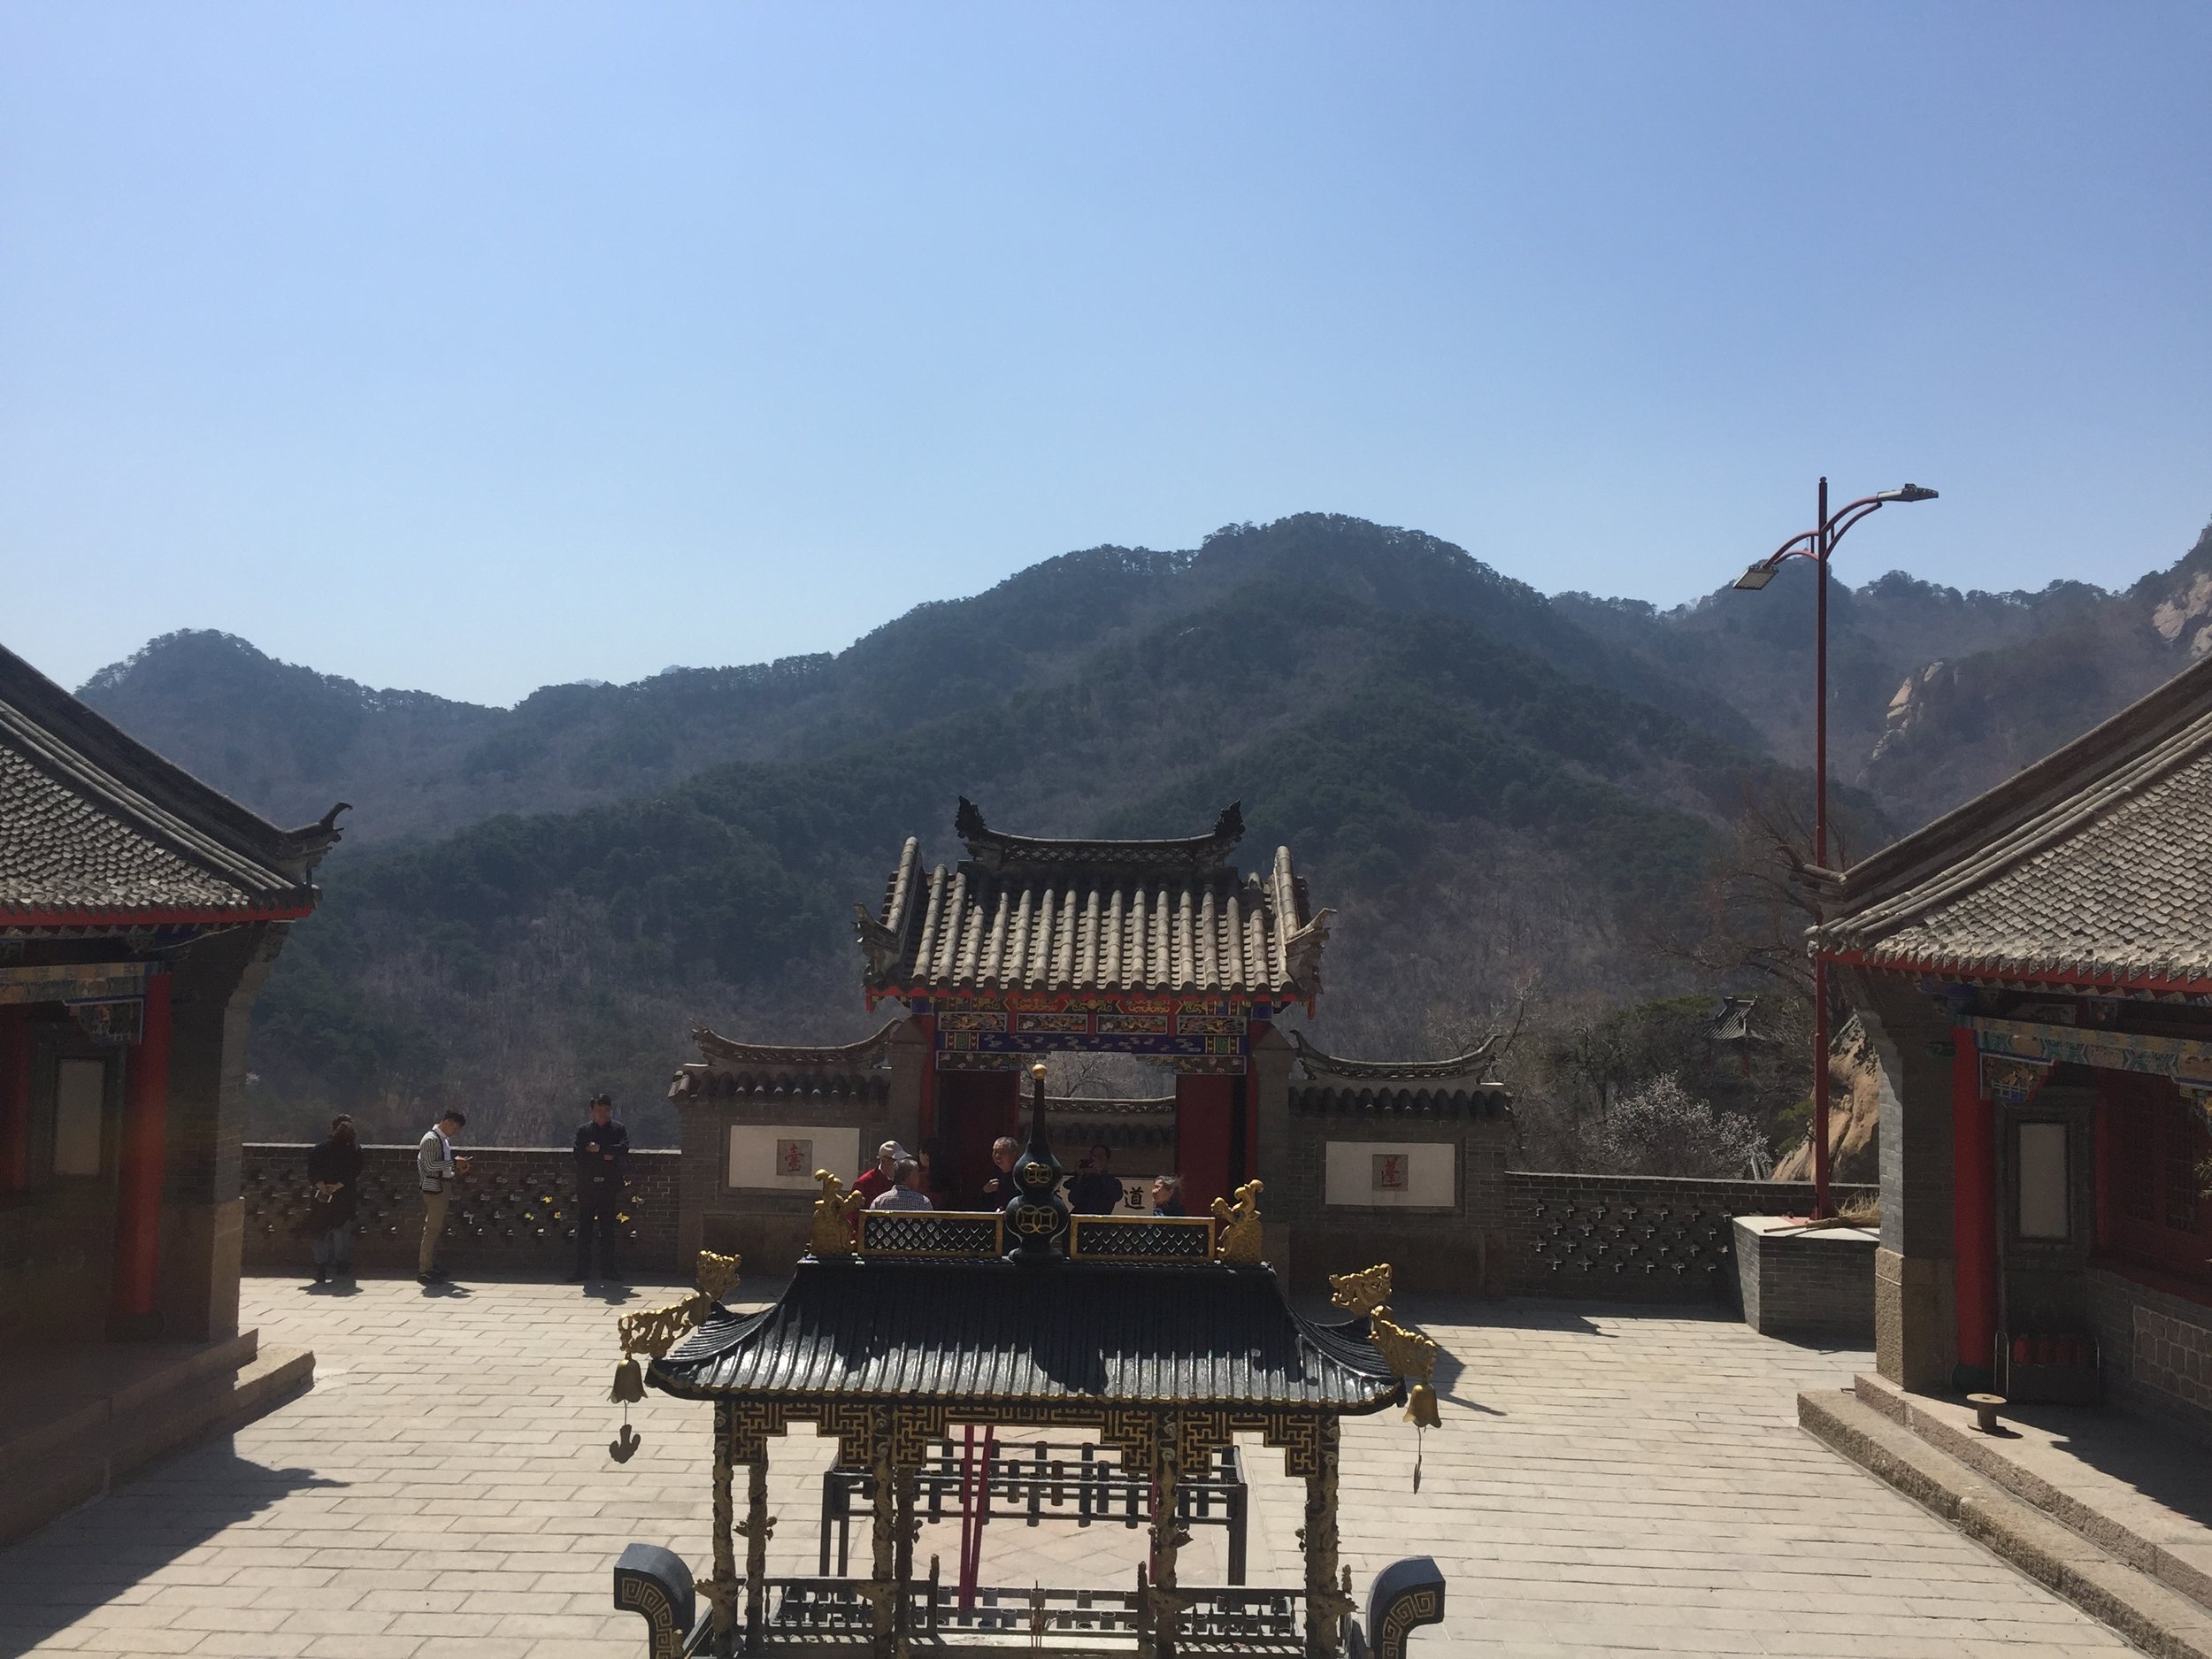 PICTURED: View from the first temple on the Taoist side of the Peach Blossom Valley.